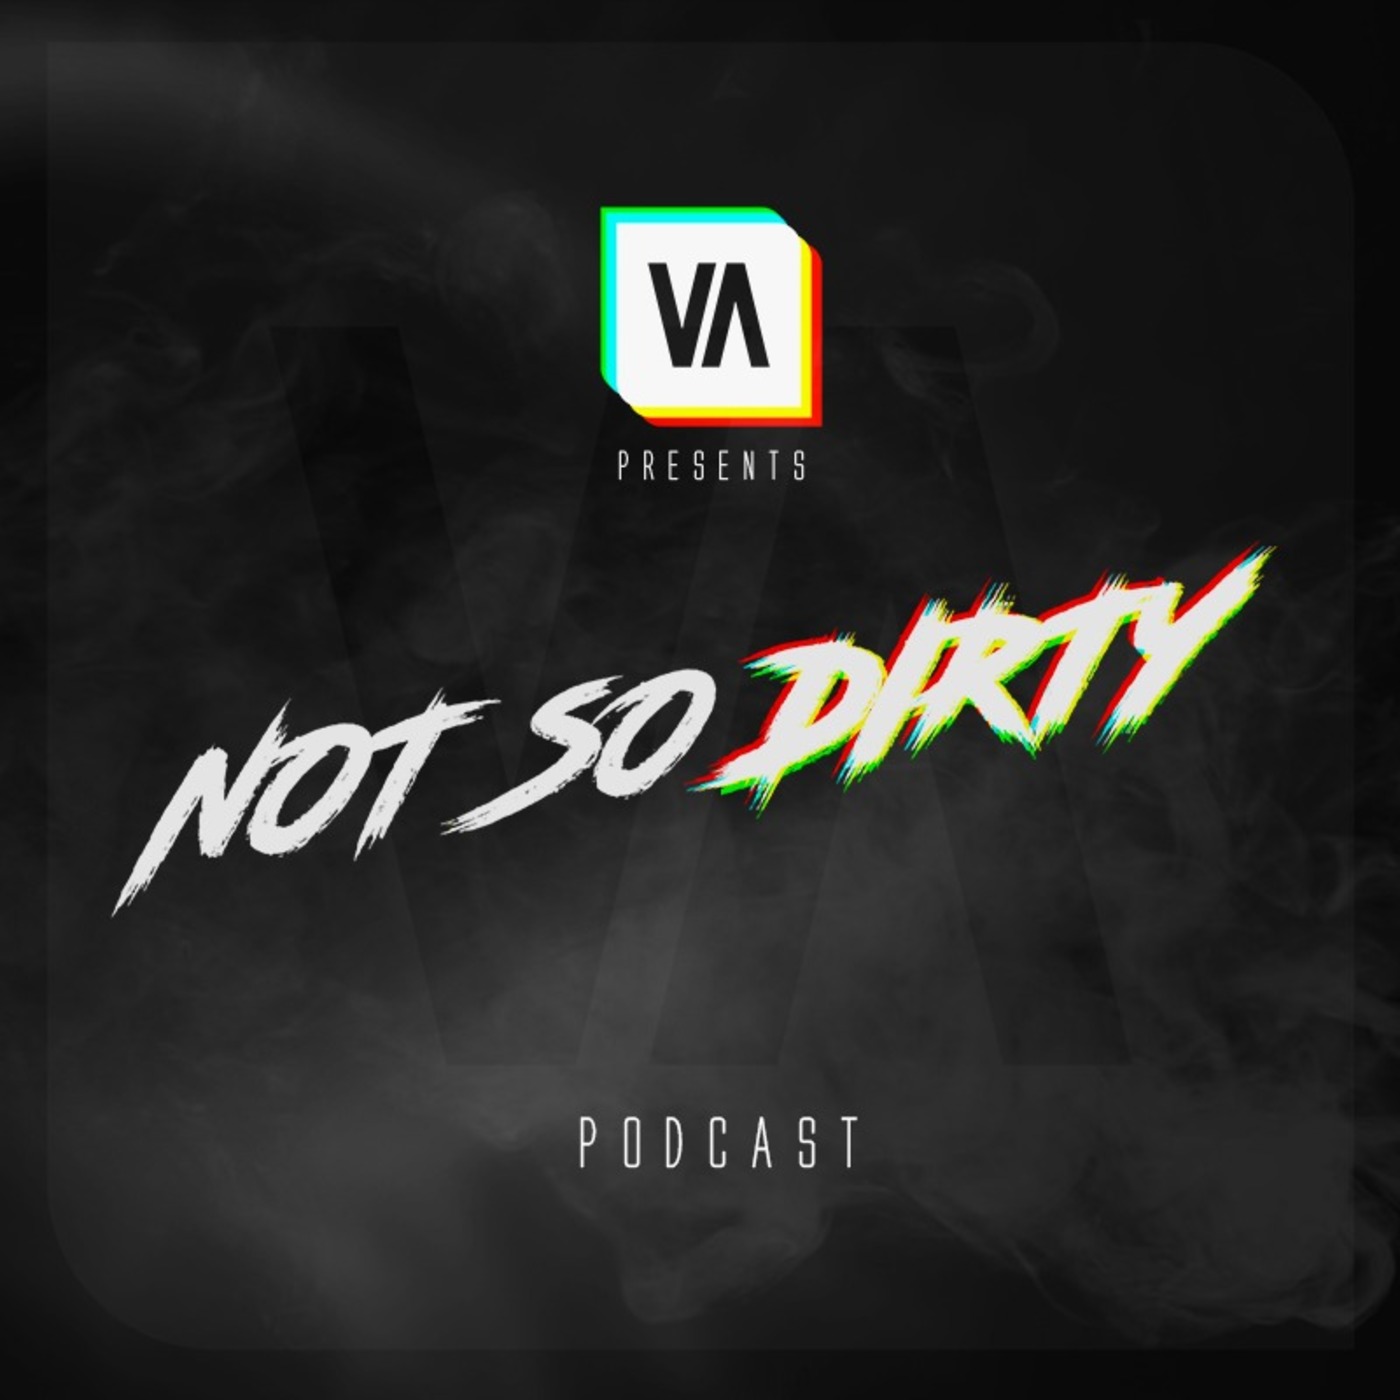 Episode 26: Not So Dirty Radioshow Ep 038 - January 2021